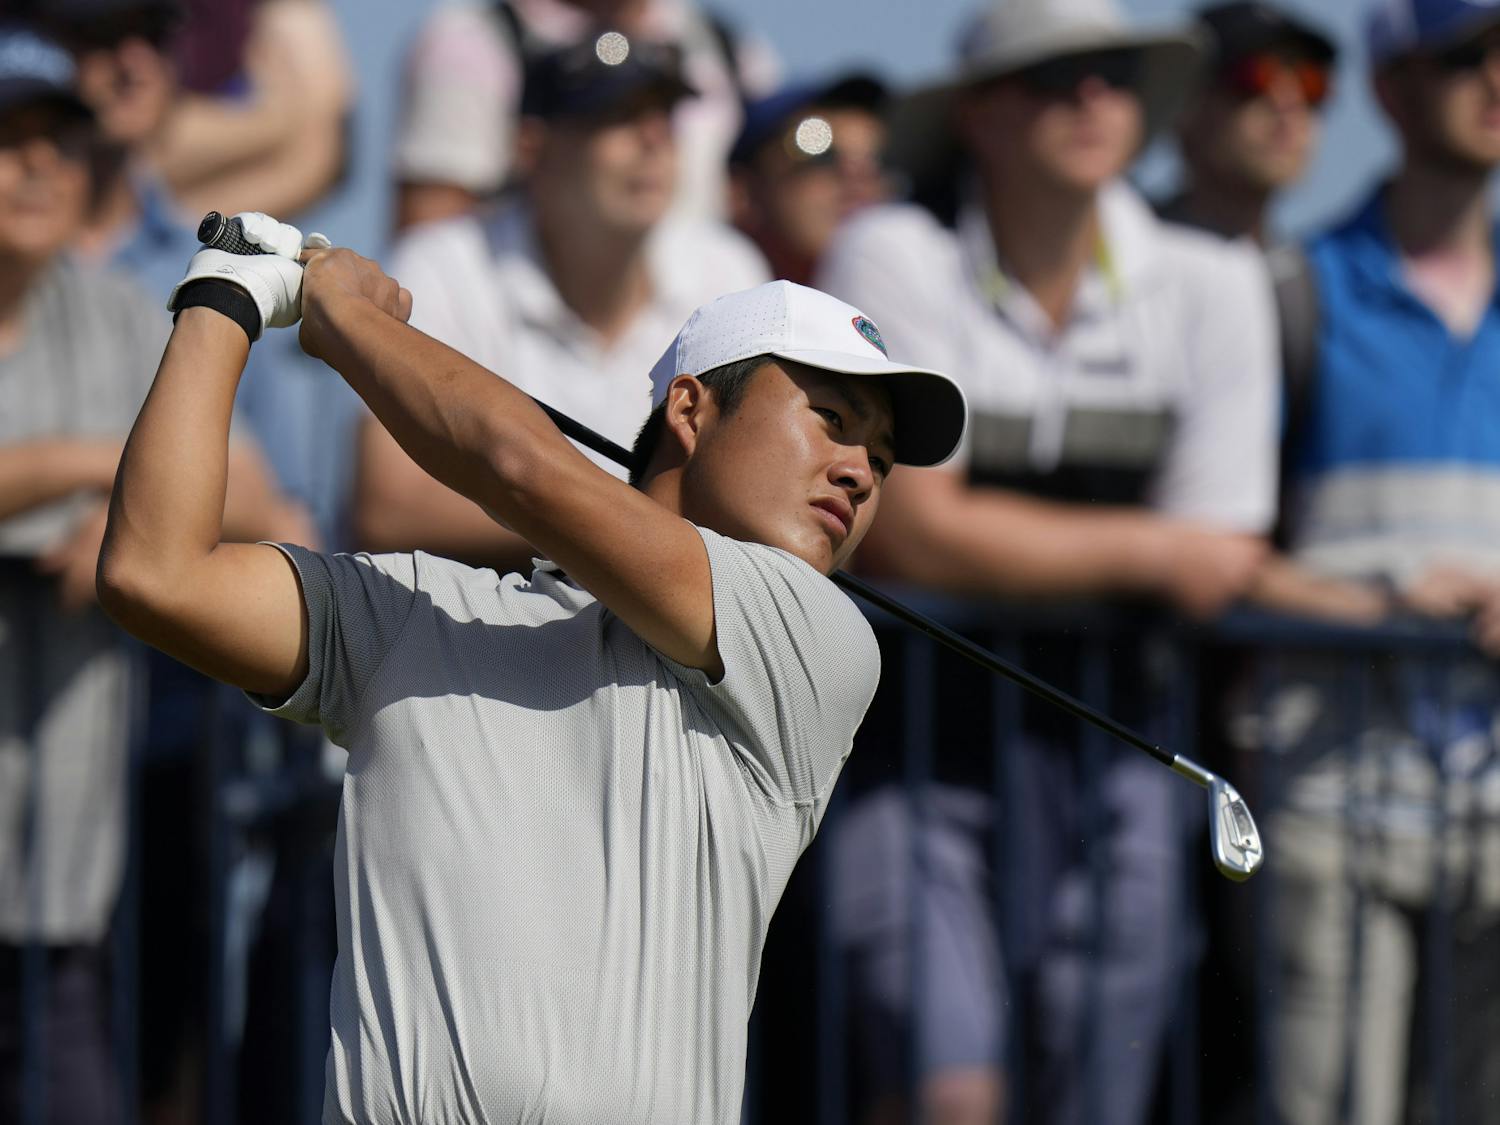 China's Yuxin Lin plays his tee shot on the 3rd hole during the third round of the British Open Golf Championship at Royal St George's golf course Sandwich, England, Saturday, July 17, 2021. (AP Photo/Alastair Grant)